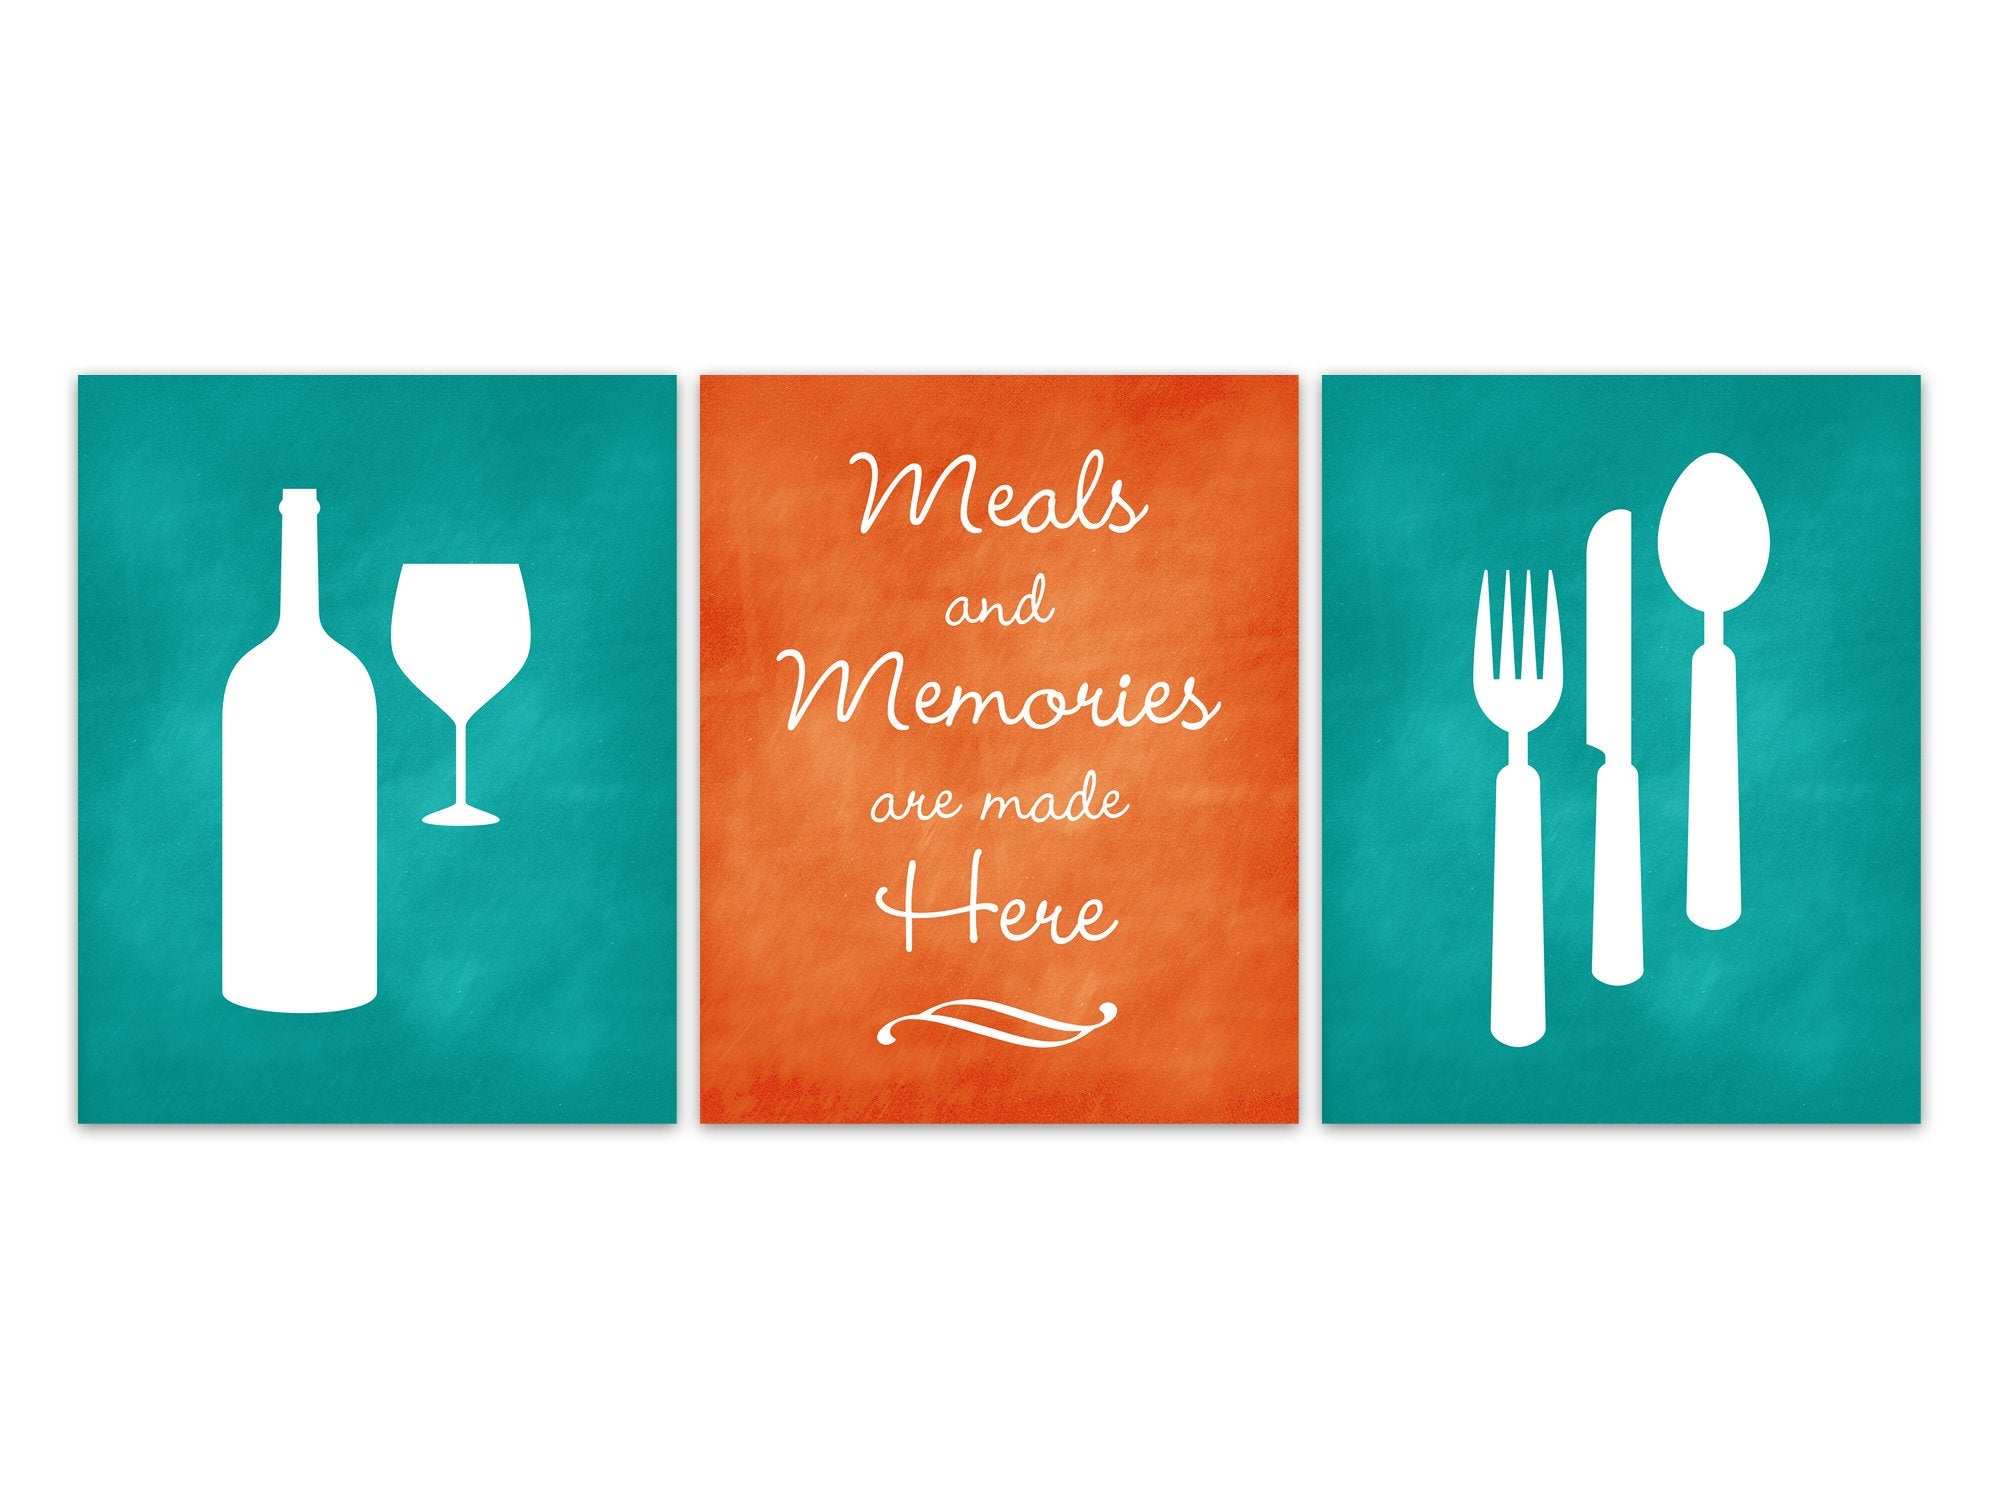 Teal Orange Kitchen CANVAS or PRINTS, Fork and Spoon Wall Decor, Wine Glass Art, Turquoise Kitchen Decor, Meals and Memories Quote - HOME462